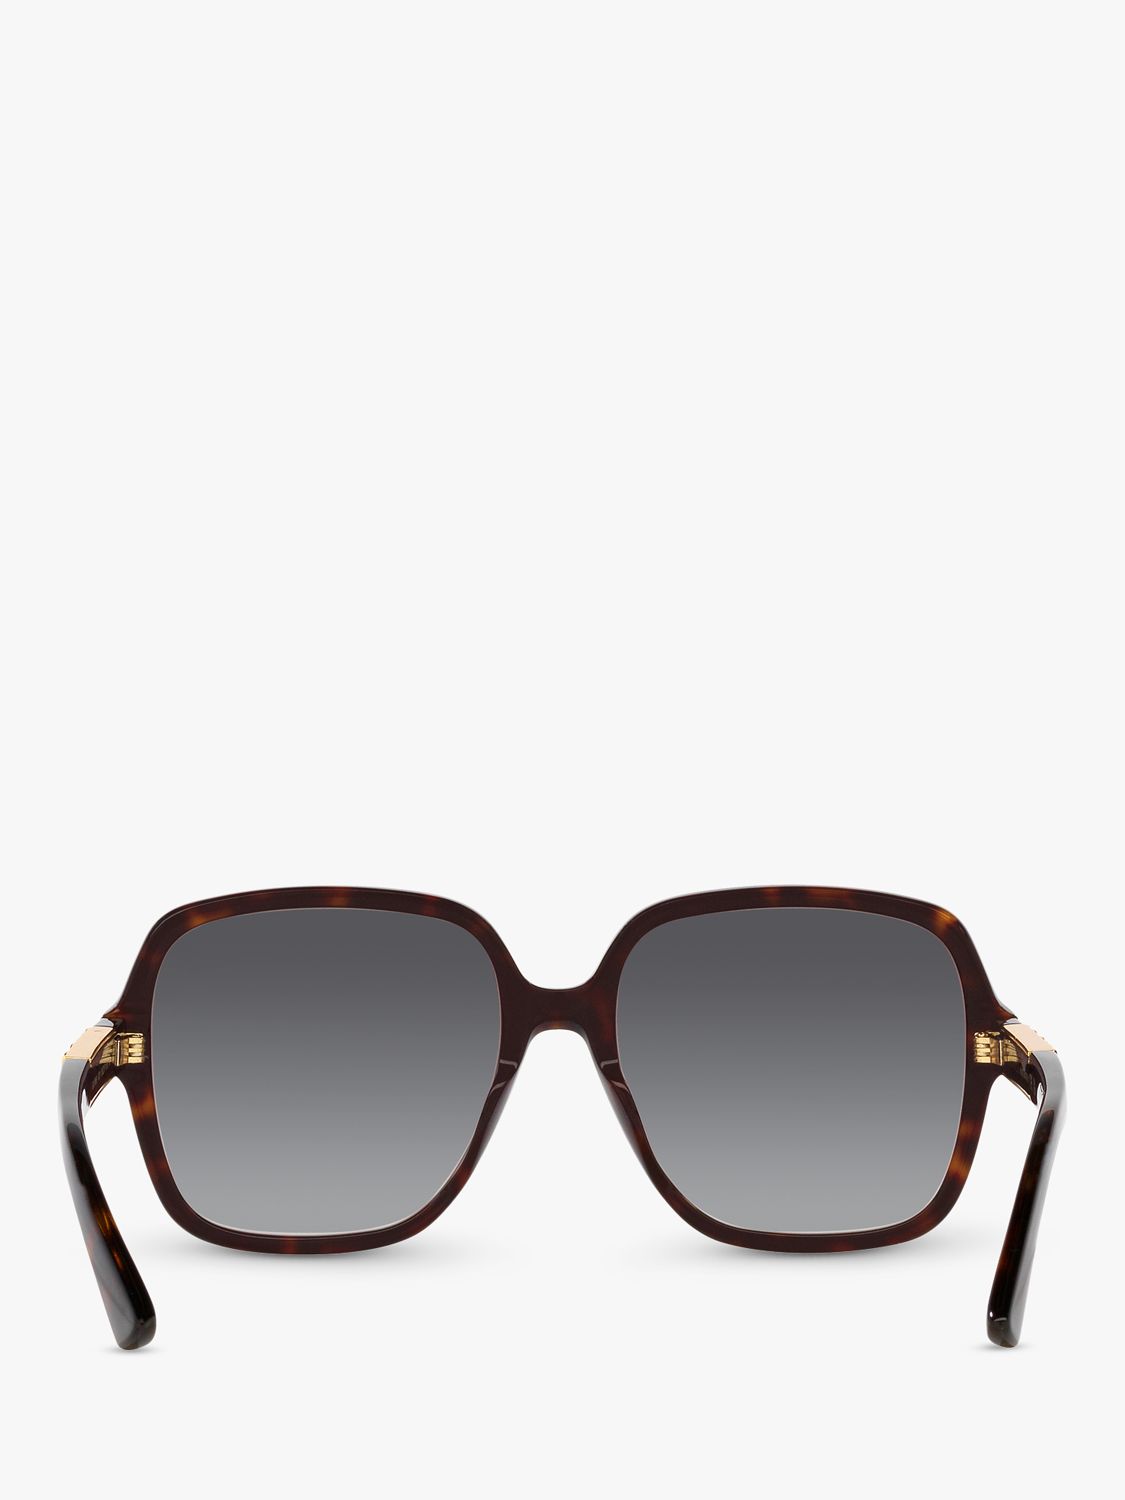 Buy Gucci GG1189S Unisex Square Sunglasses, Brown/Grey Gradient Online at johnlewis.com